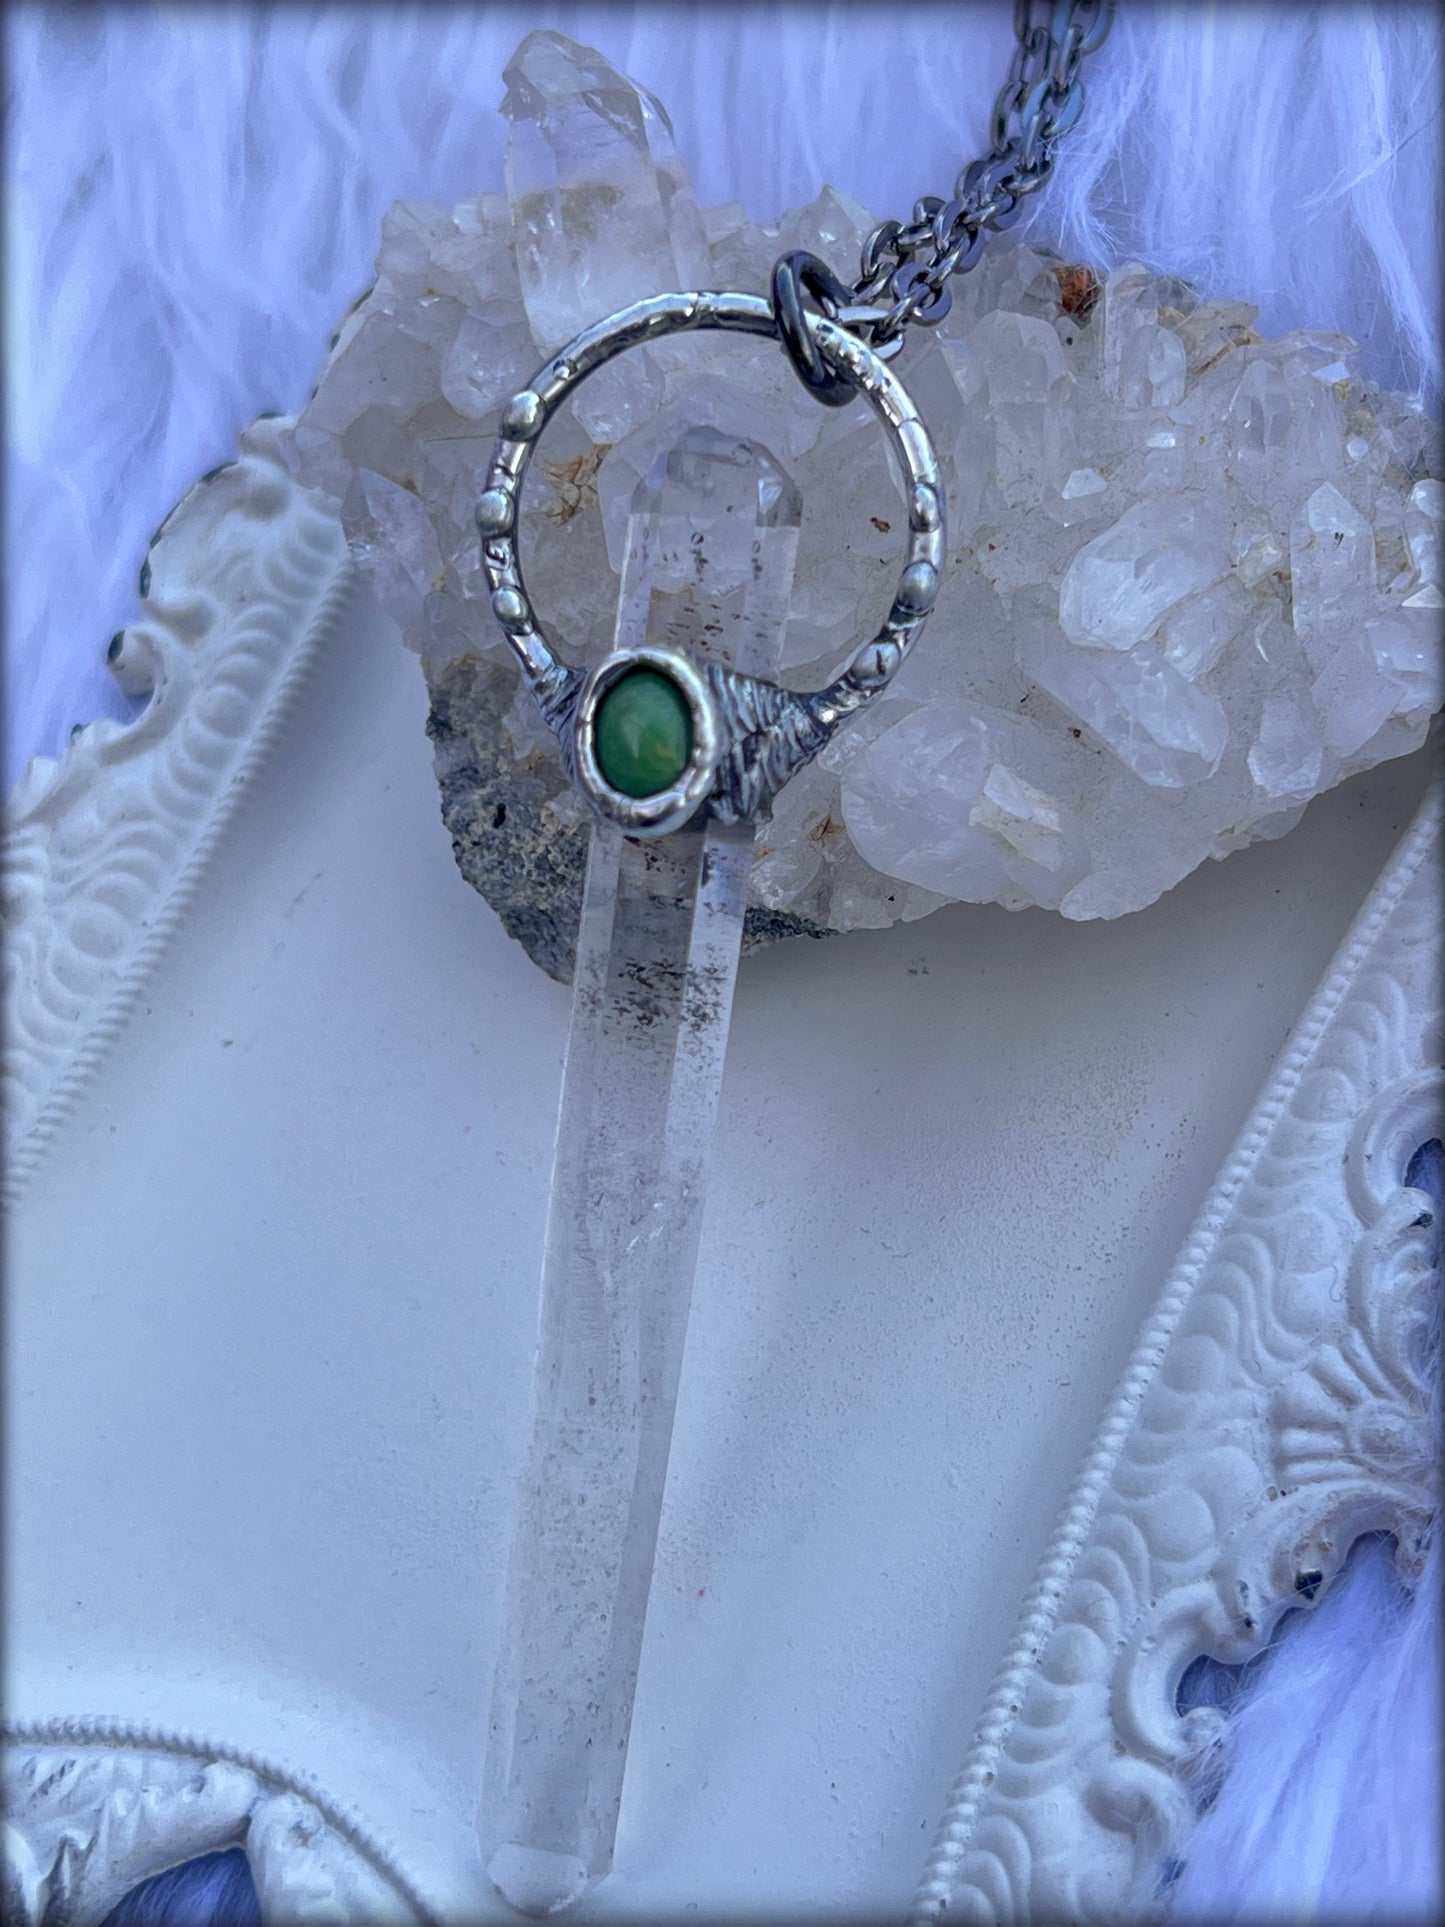 Mefkat~Hand crafted clear quartz wand with turquoise Tiffany technique crystal Talisman necklac